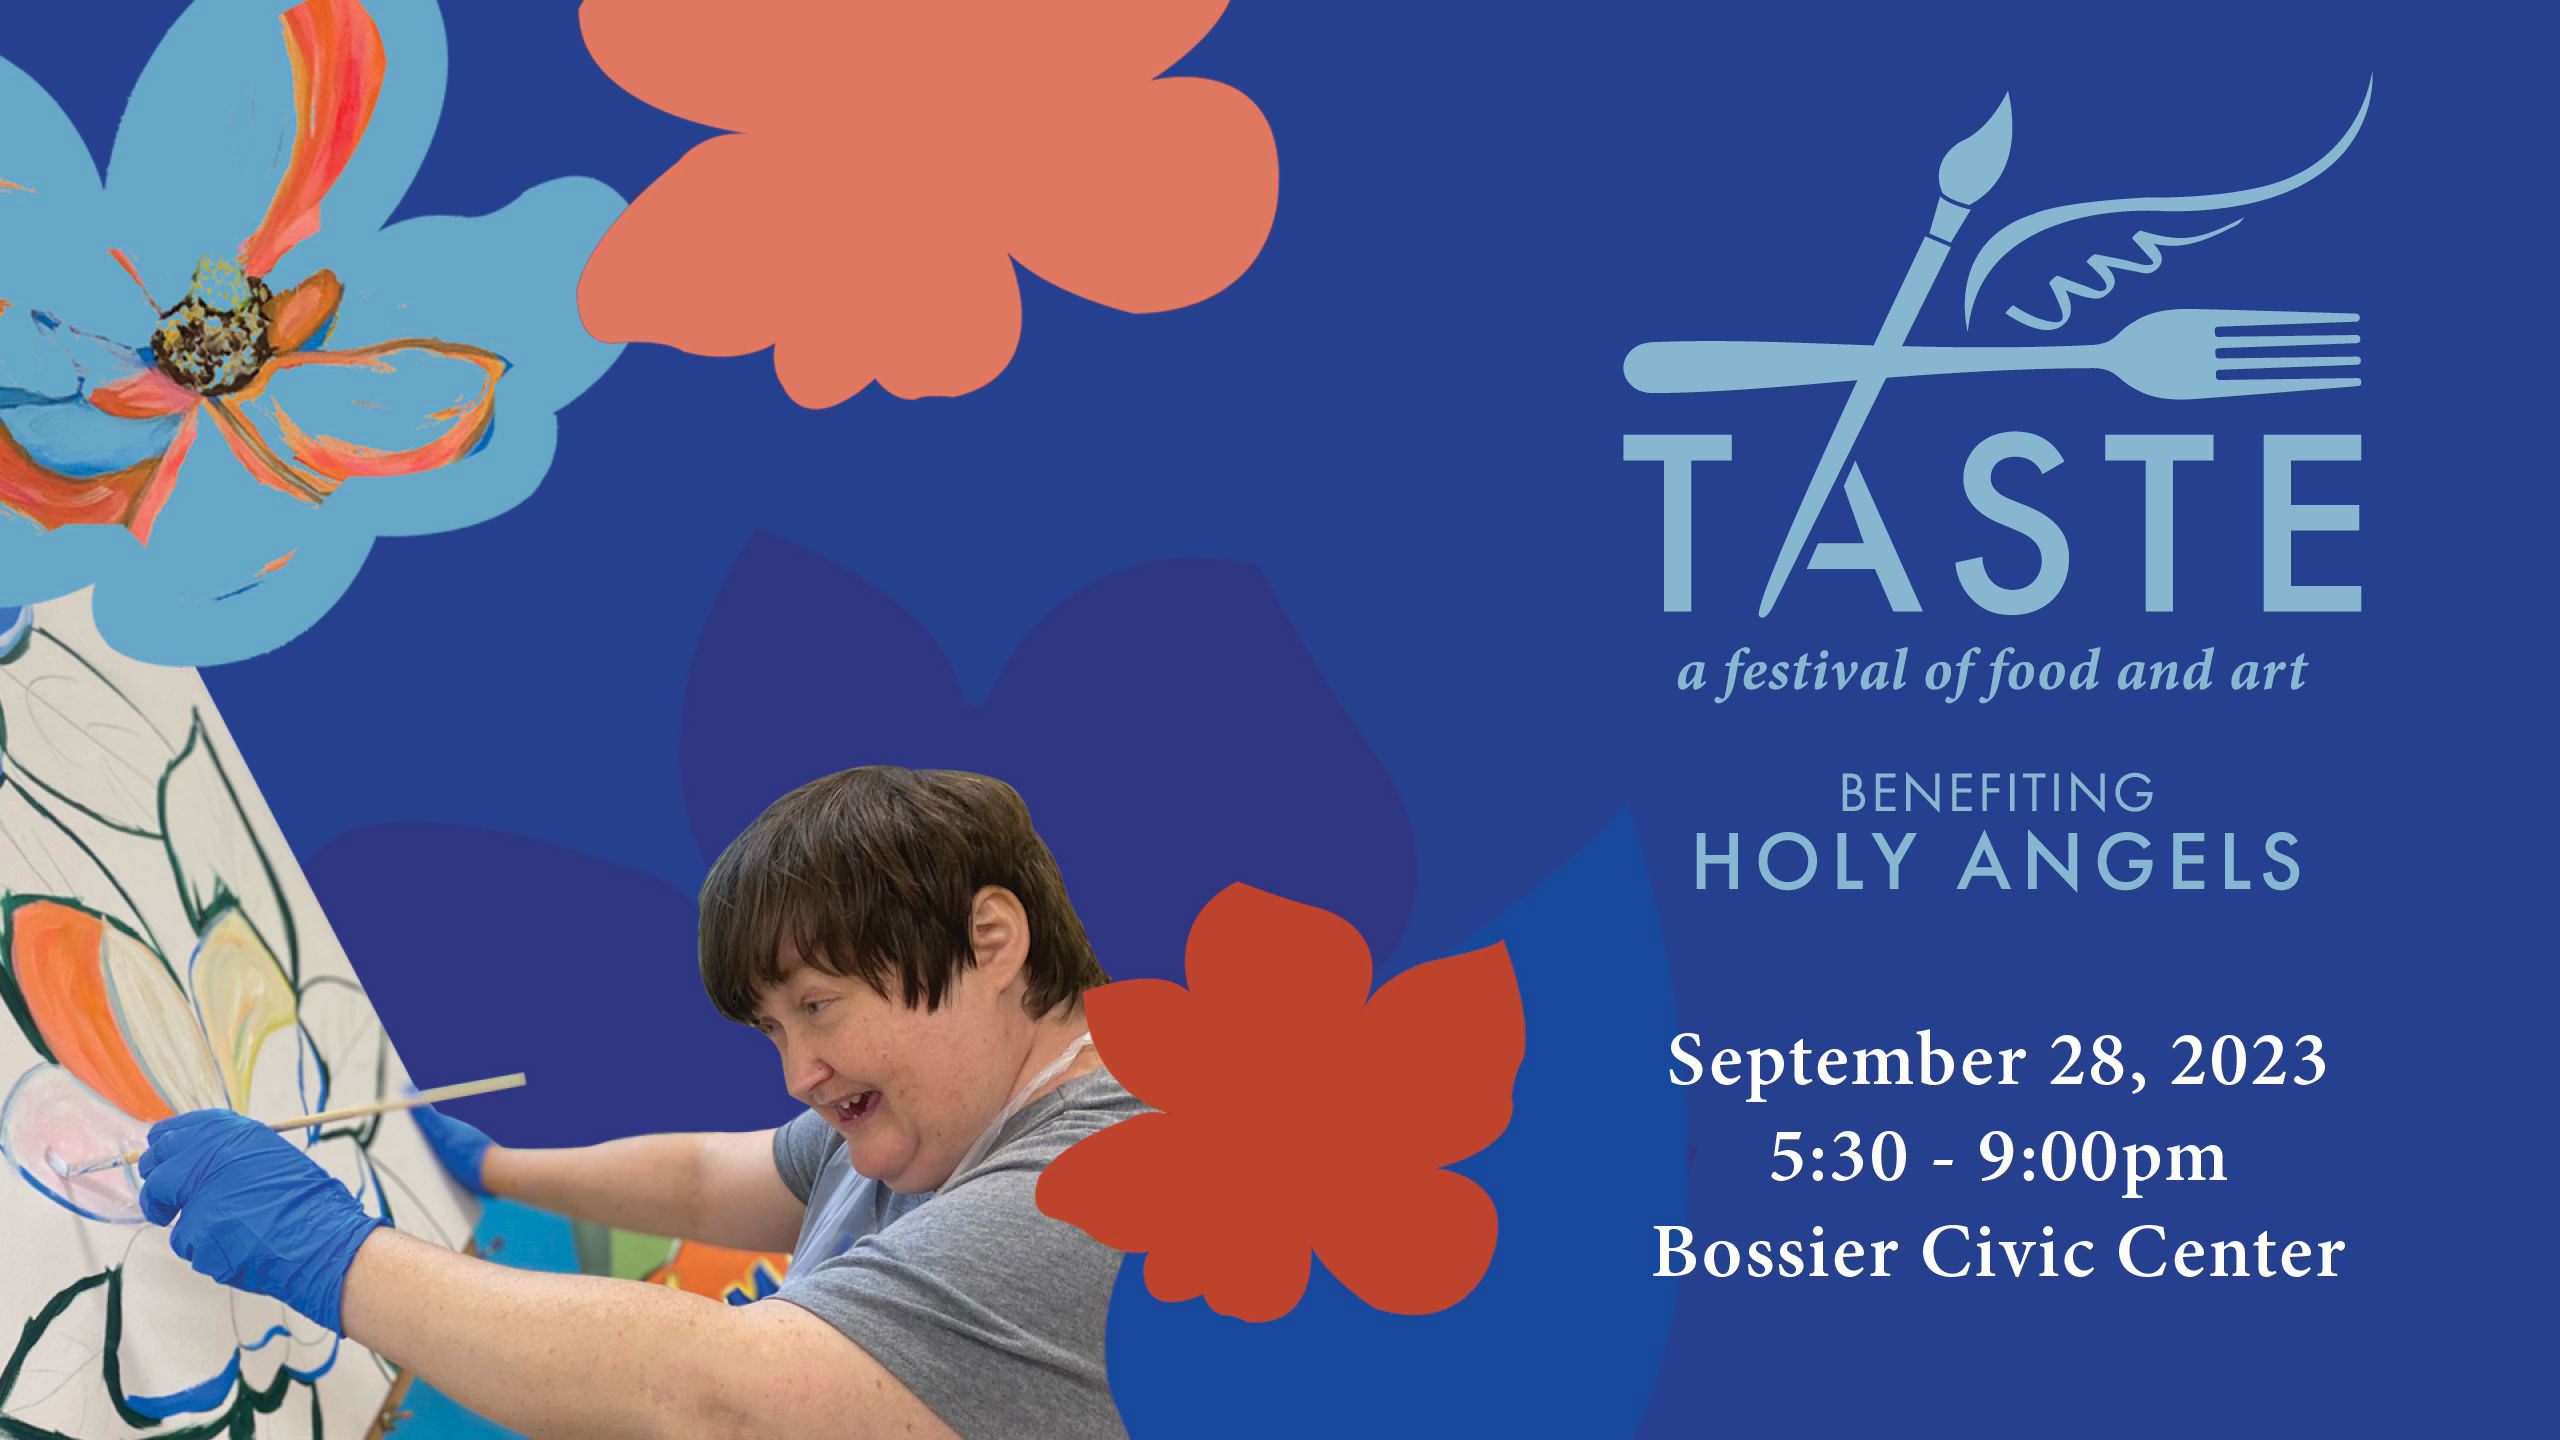 Holy Angels to host Taste event with 40+ restaurant vendors